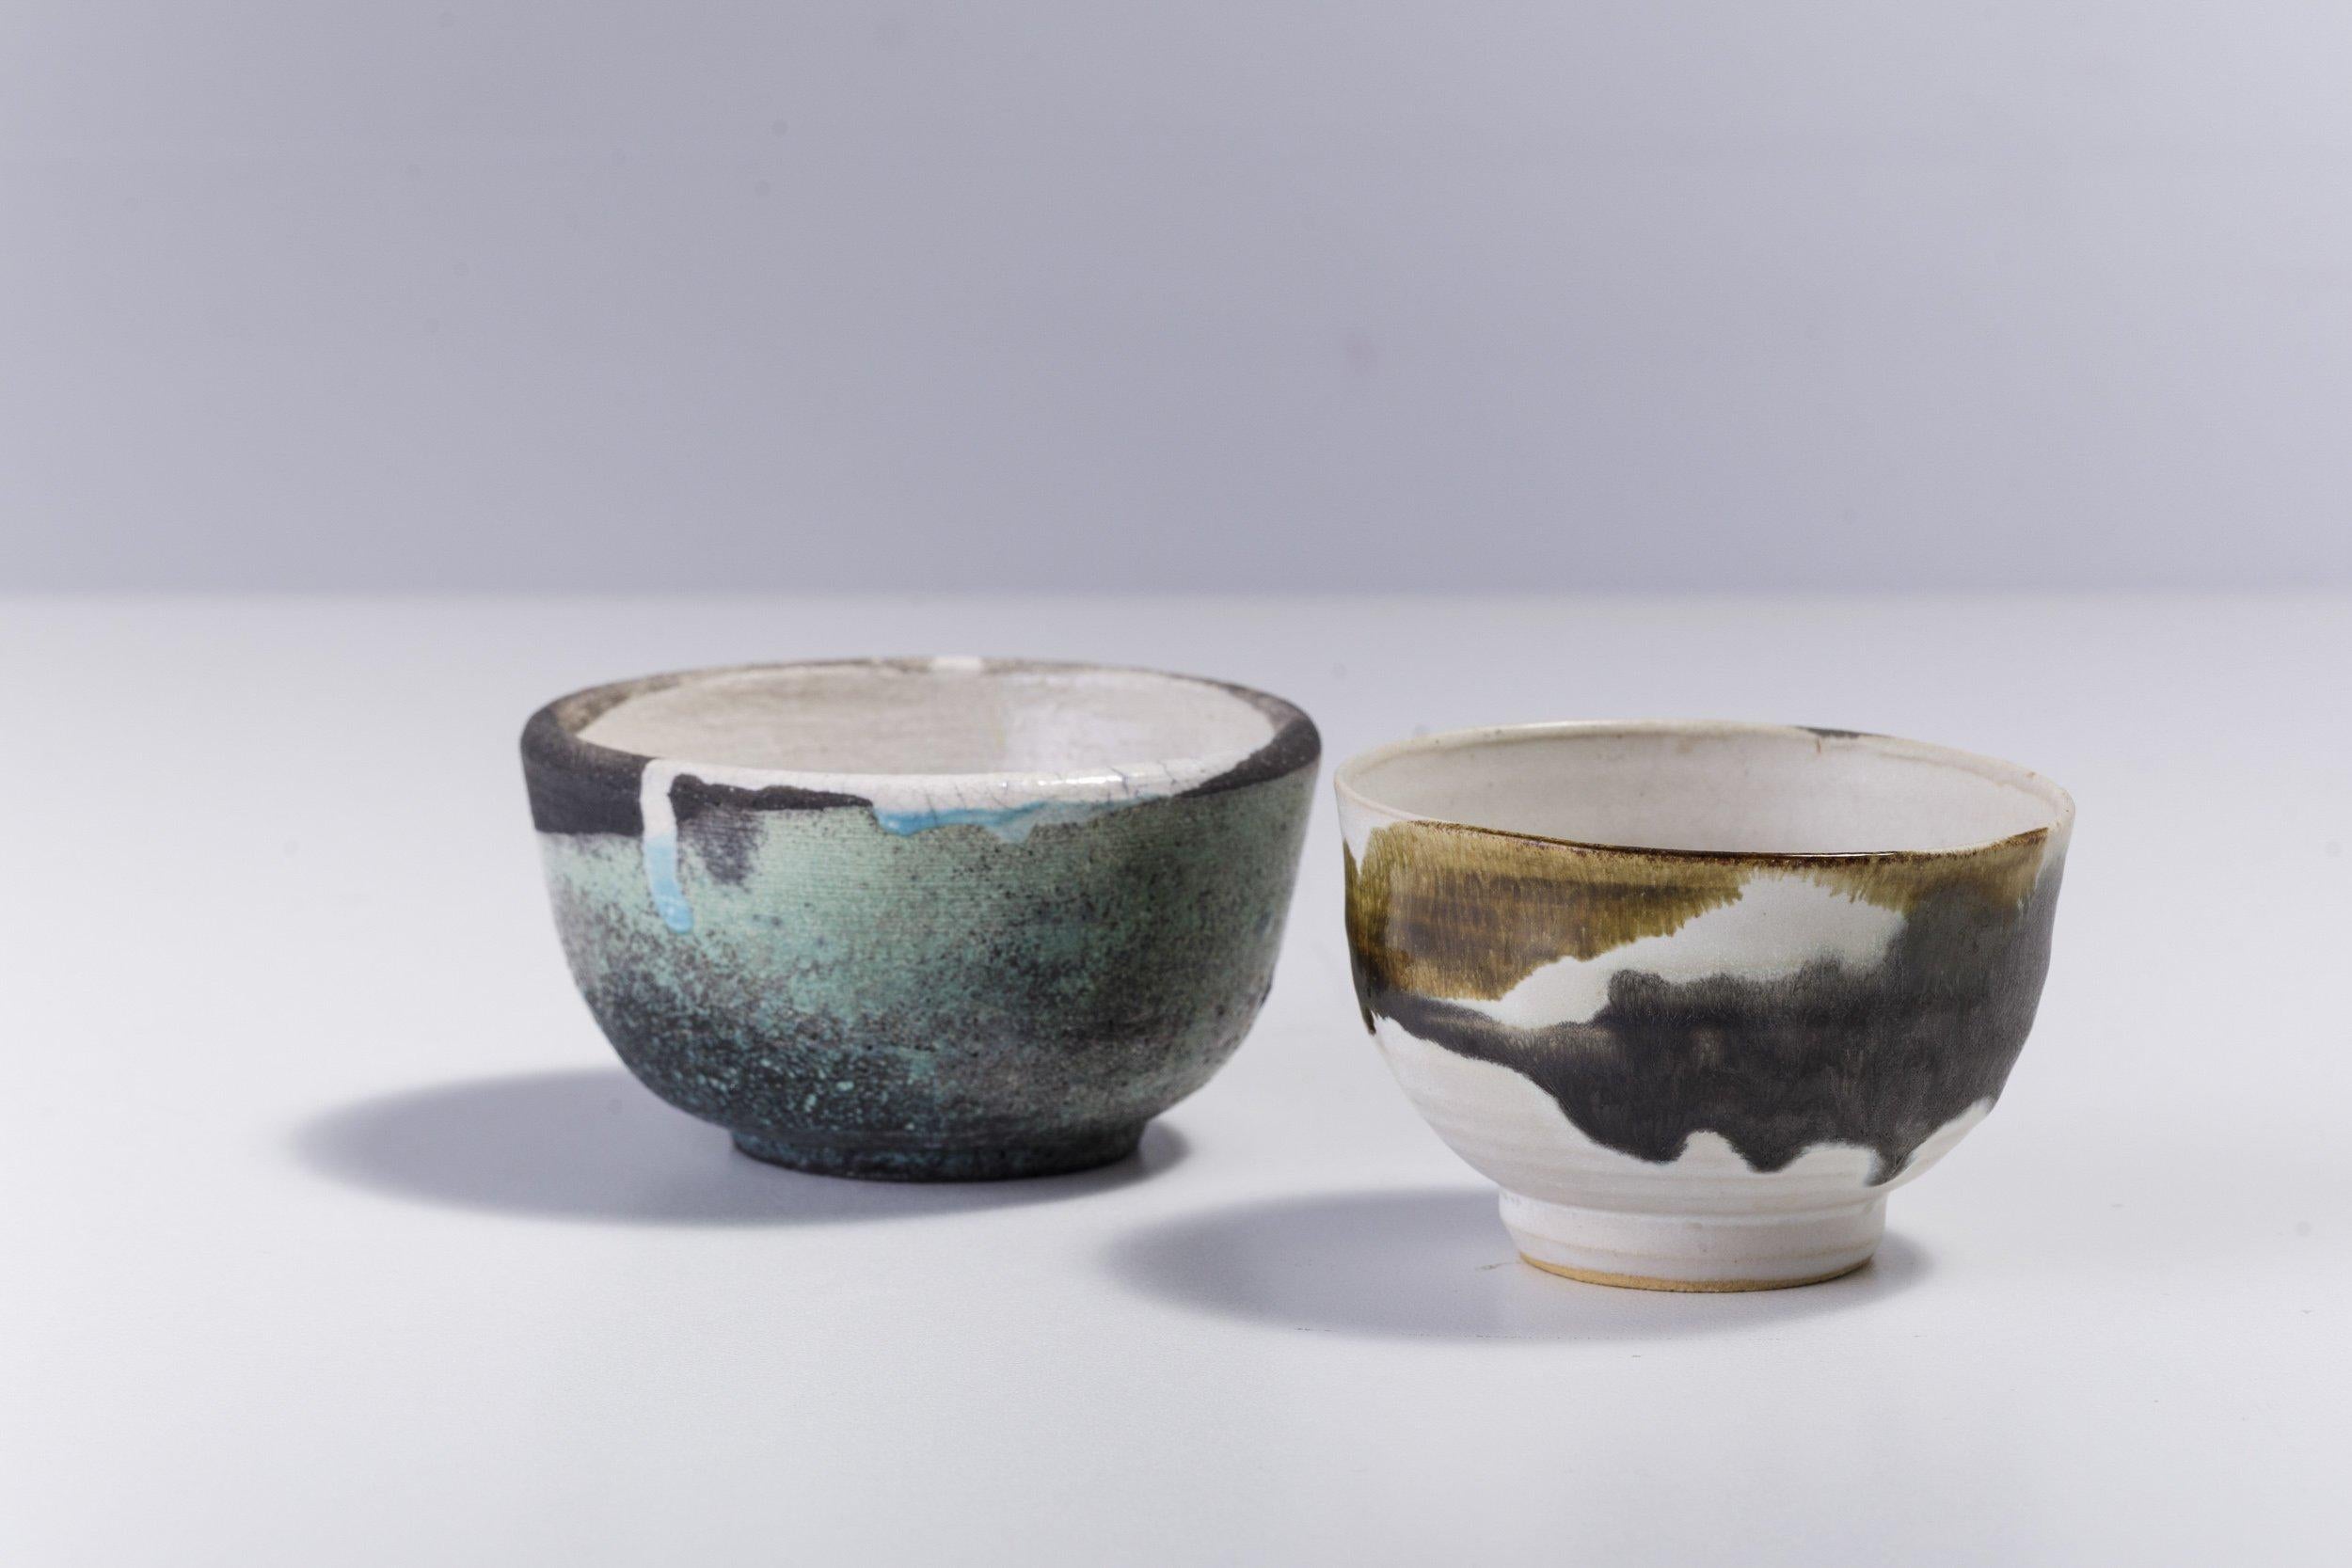 Cloud tea cups

These two sublime teacups of Japanese inspiration are extraordinarily handcrafted accordingly to the Raku technique, which makes each piece a one-of-a-kind object of unprecedented sophistication. The two ceramic pieces are